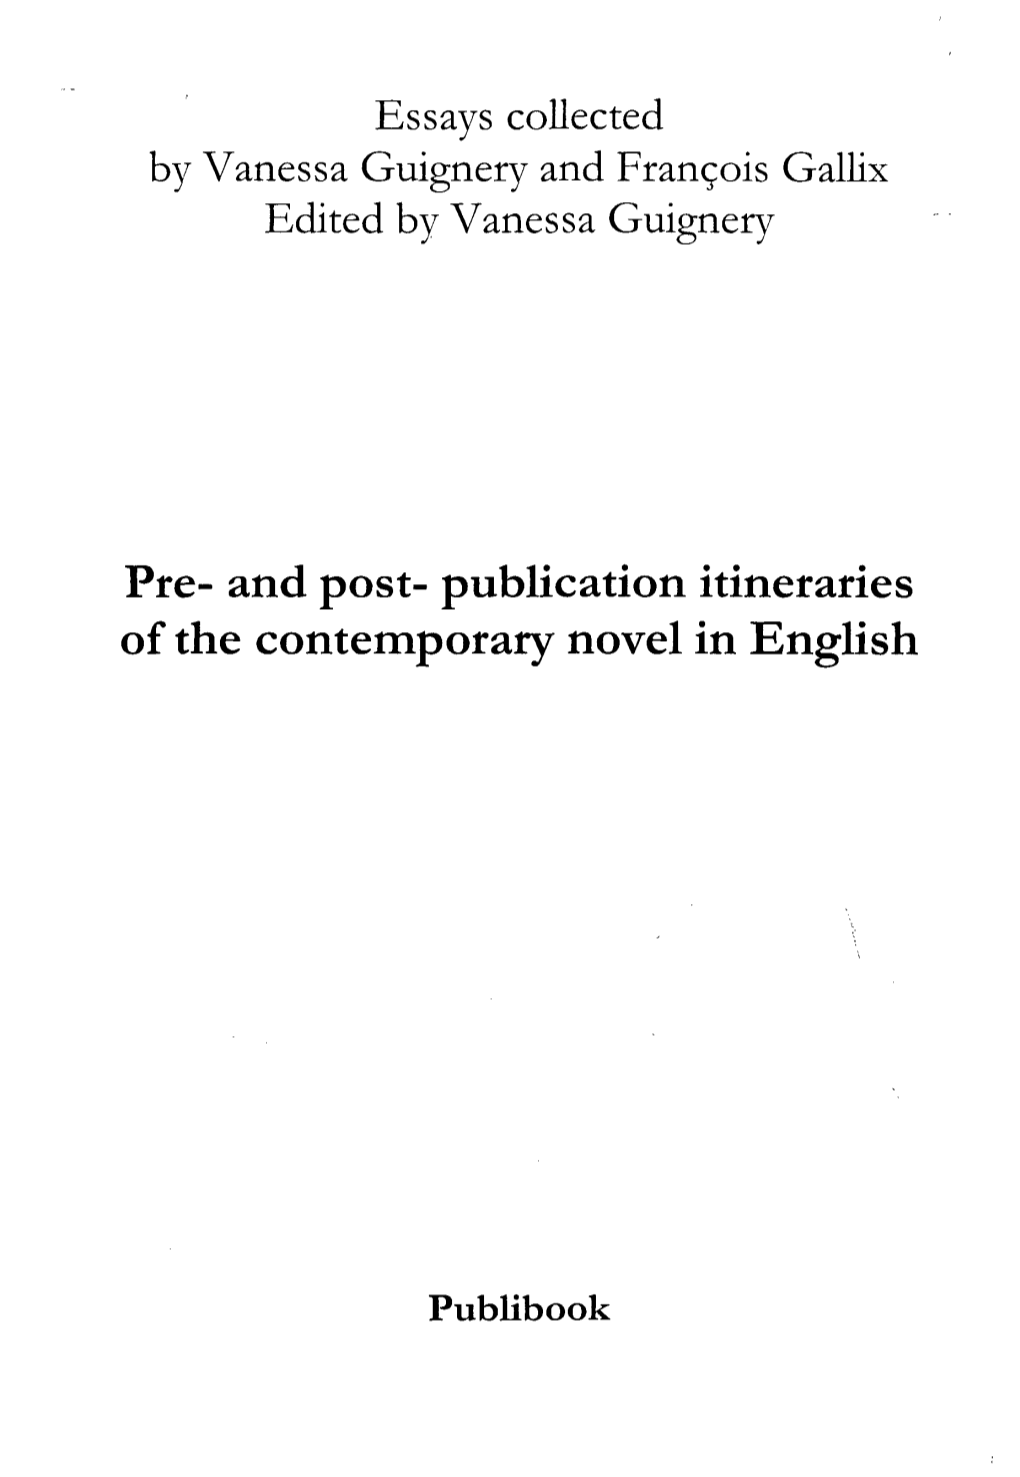 Publication Itineraries of the Contemporary Novel in English